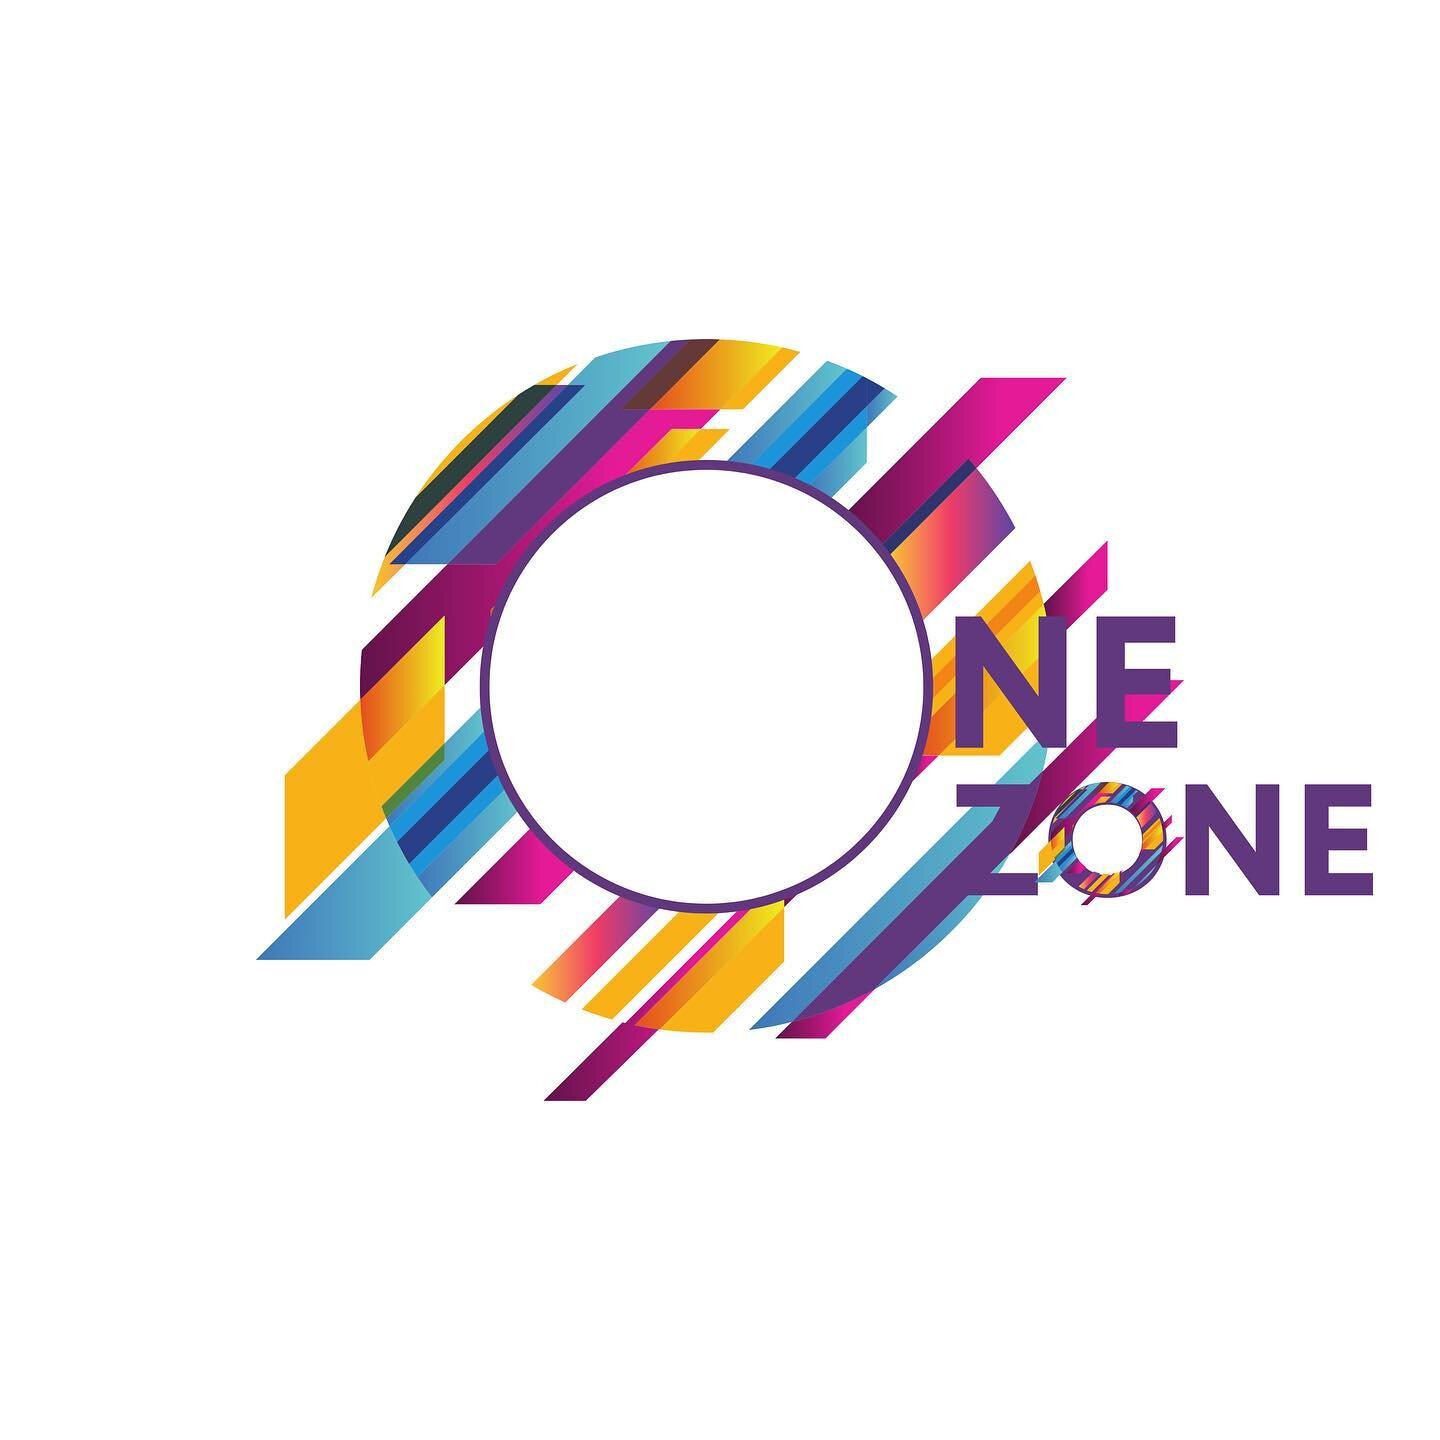 The countdown is over&hellip;. It&rsquo;s happening, One Zone&rsquo;s Official Launch 🚀 

We are kick starting this week with a new creative and bold brand identity AND we have a new website to go with it #MondayMotivation 

&gt;&gt;&gt;&gt; www.one